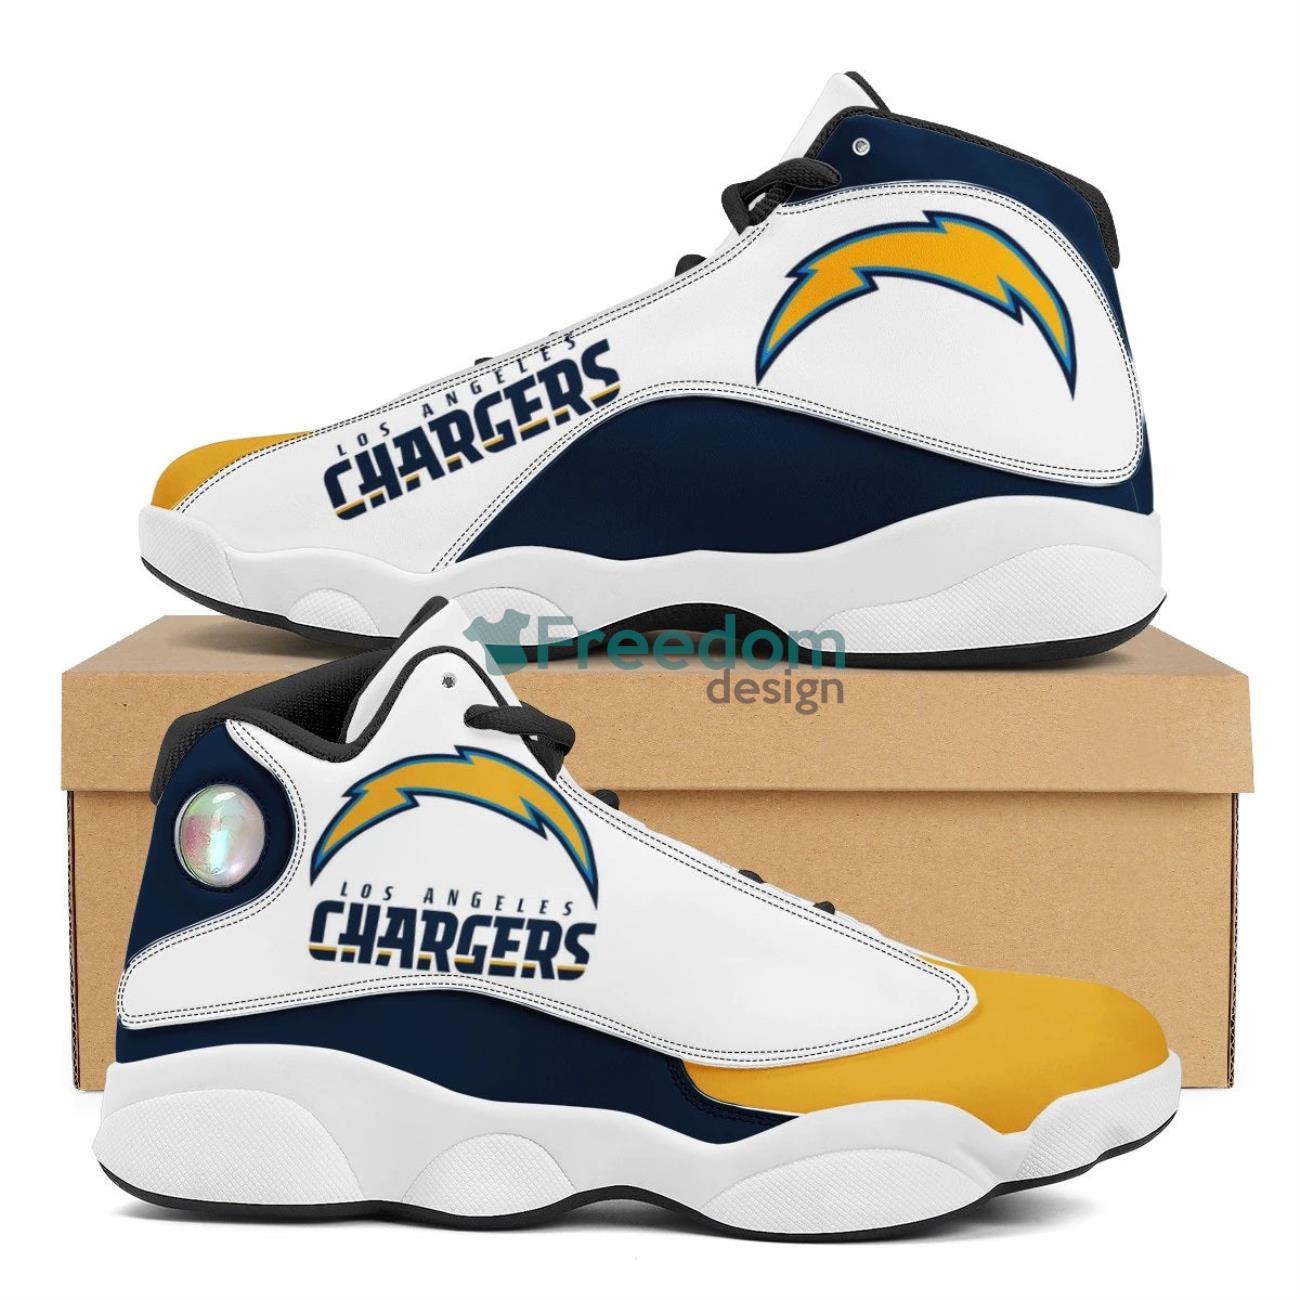 Los Angeles Chargers Team Air Jordan 13 Shoes For Fans